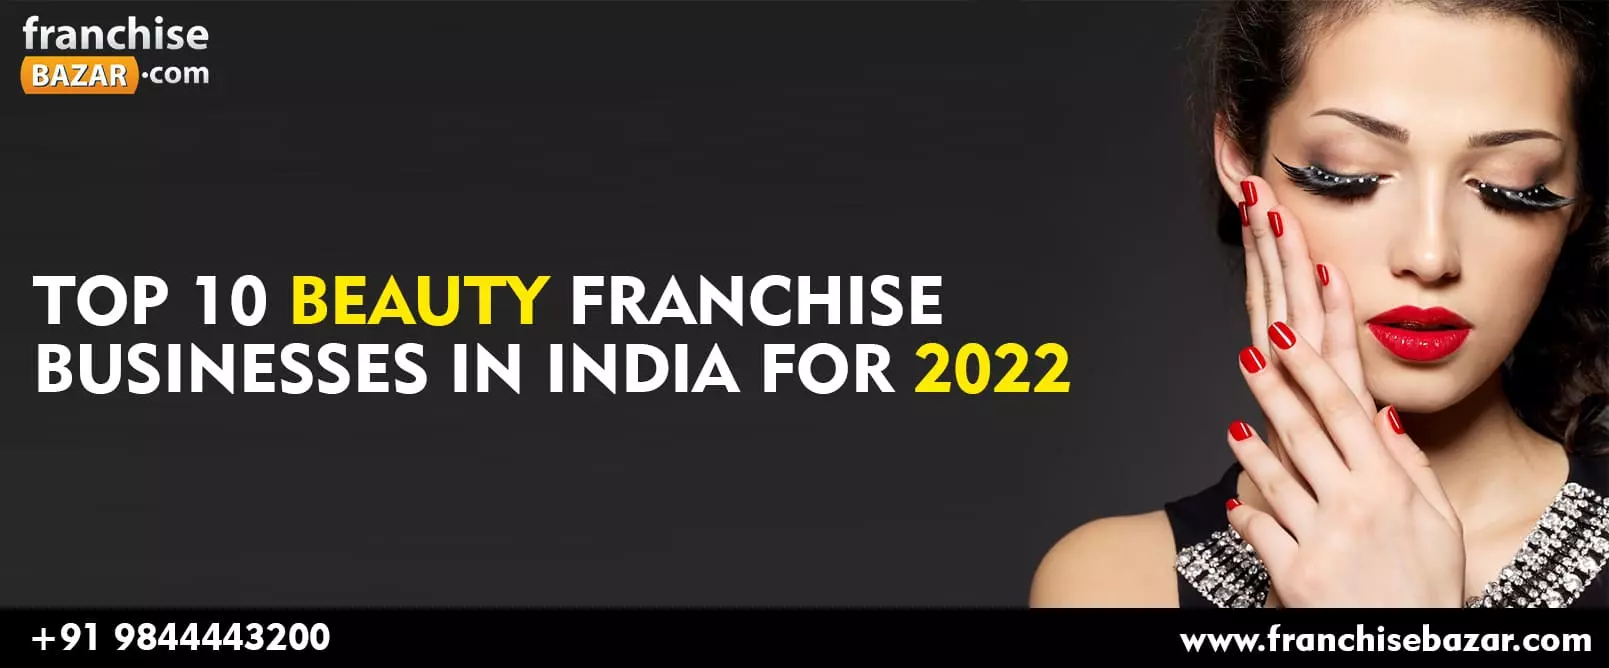 Find the Top 10 Beauty Franchise Businesses in India for 2022